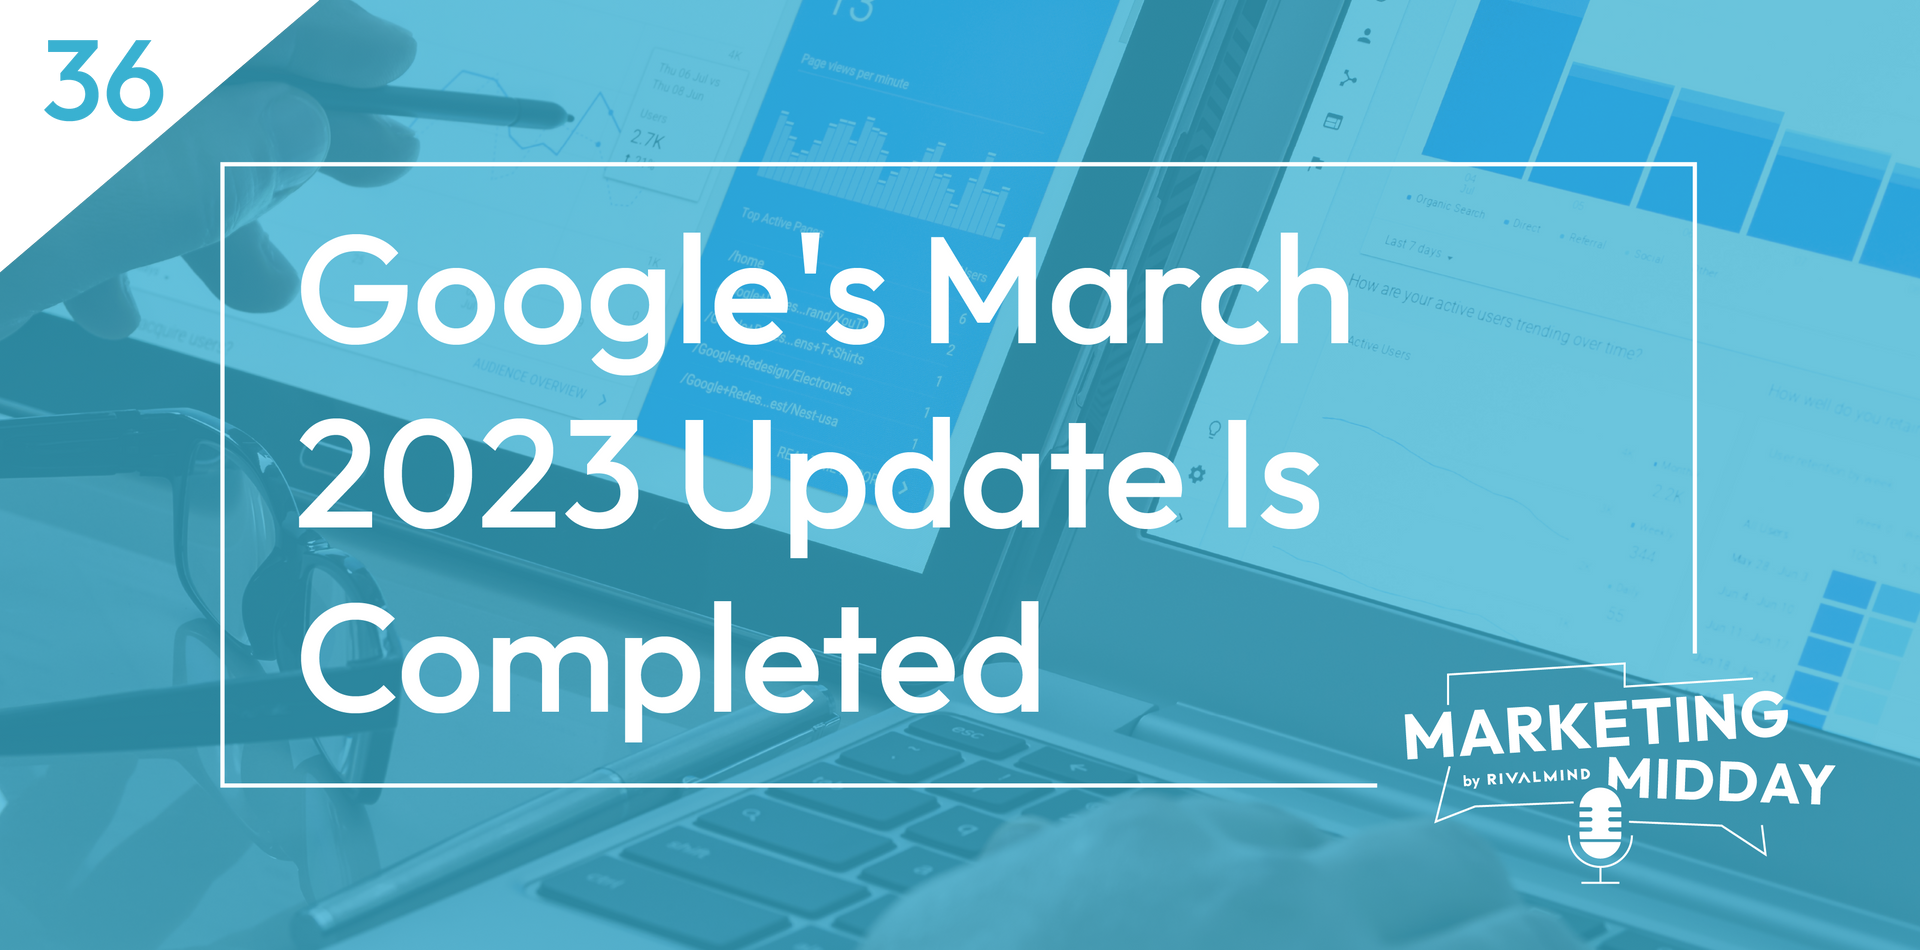 google's march 2023 update is completed